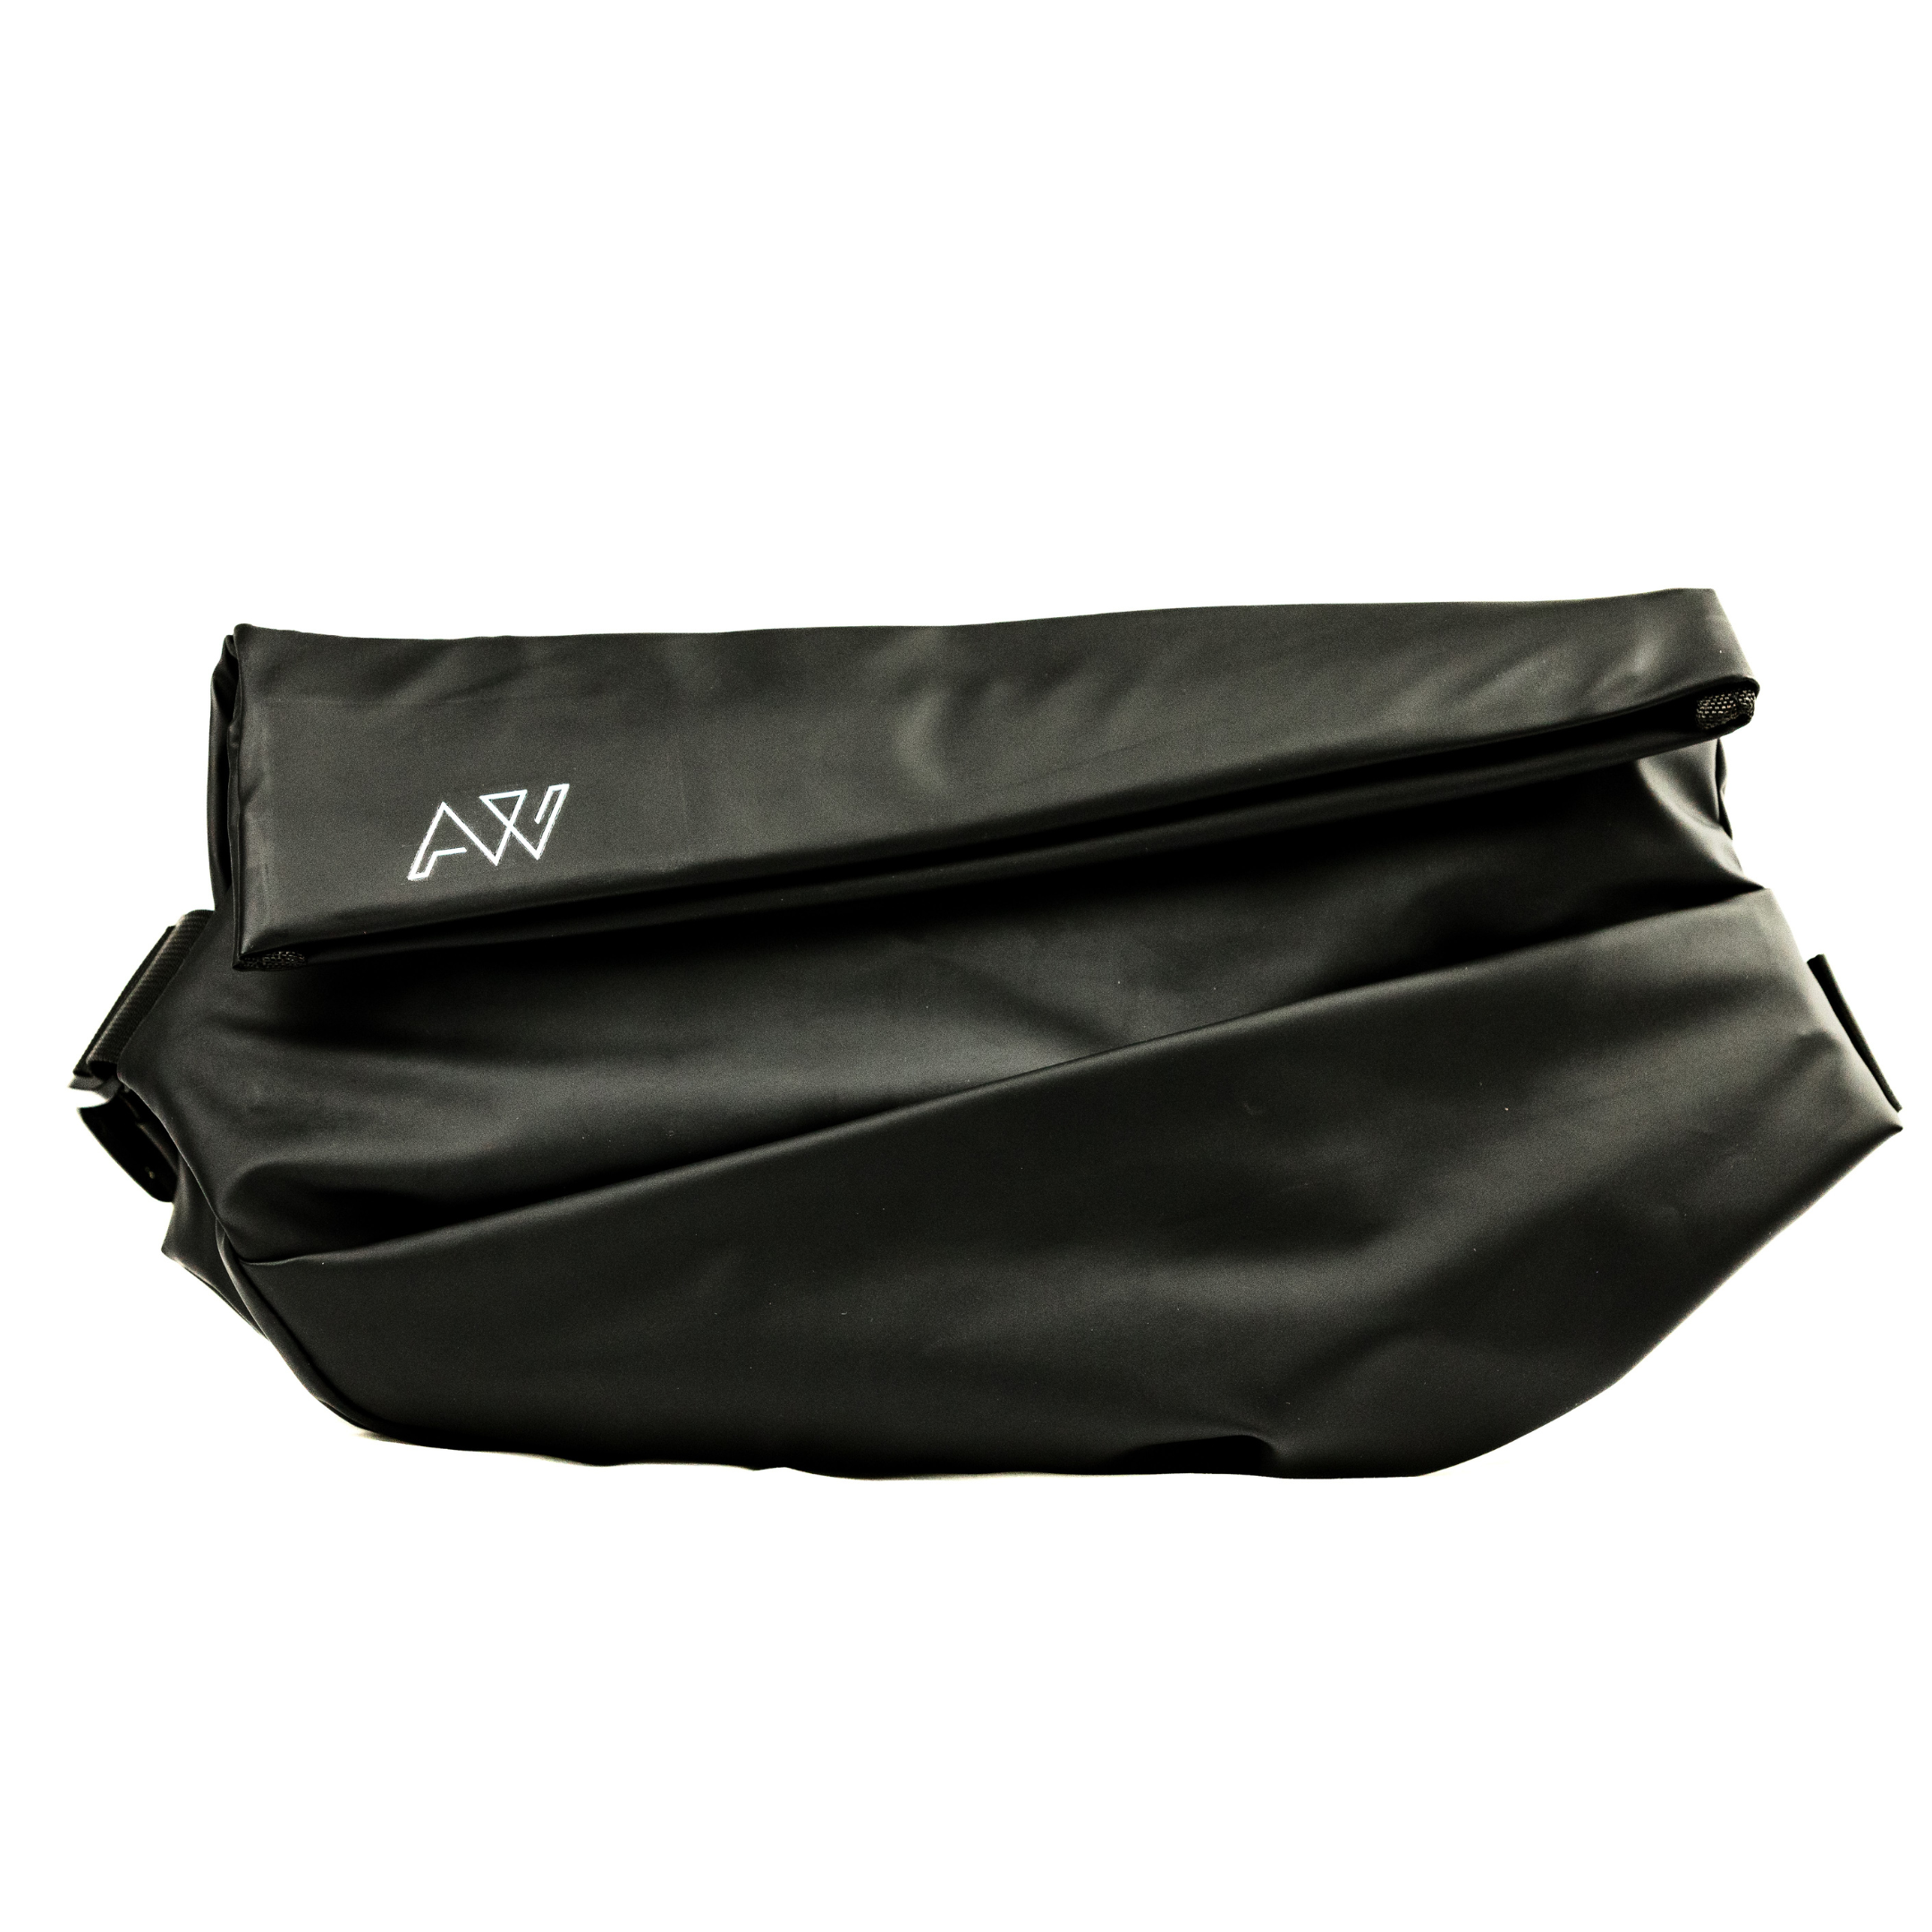 AW Unisex Double Tuck Fanny Pack In Waterproof Black Oxford Canvas